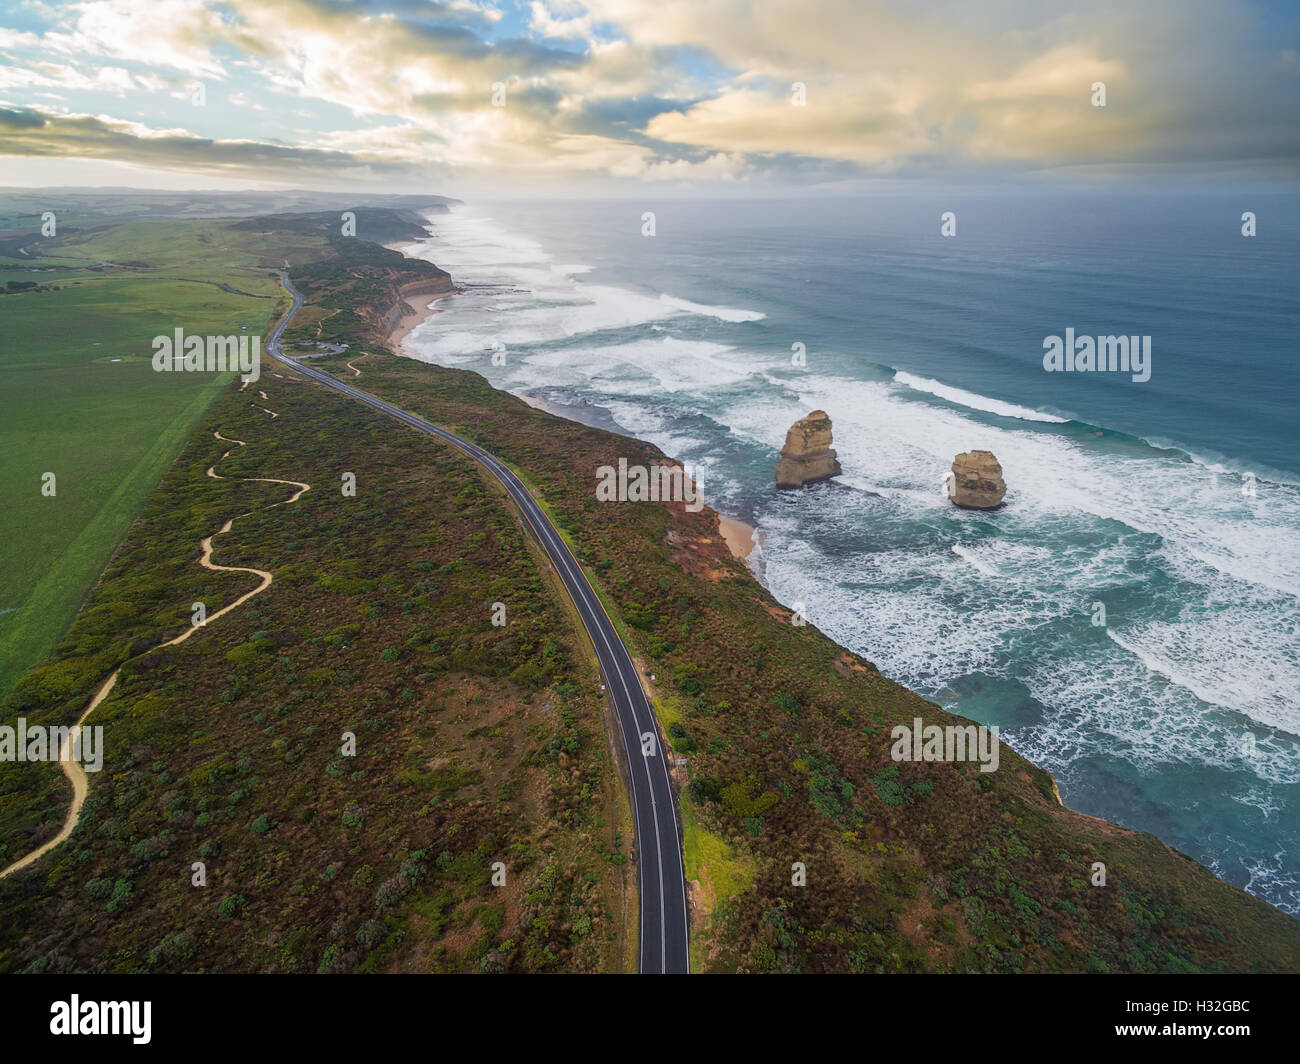 Aerial view of the Great Ocean Road with Gog and Magog rock formations, Victoria, Australia Stock Photo